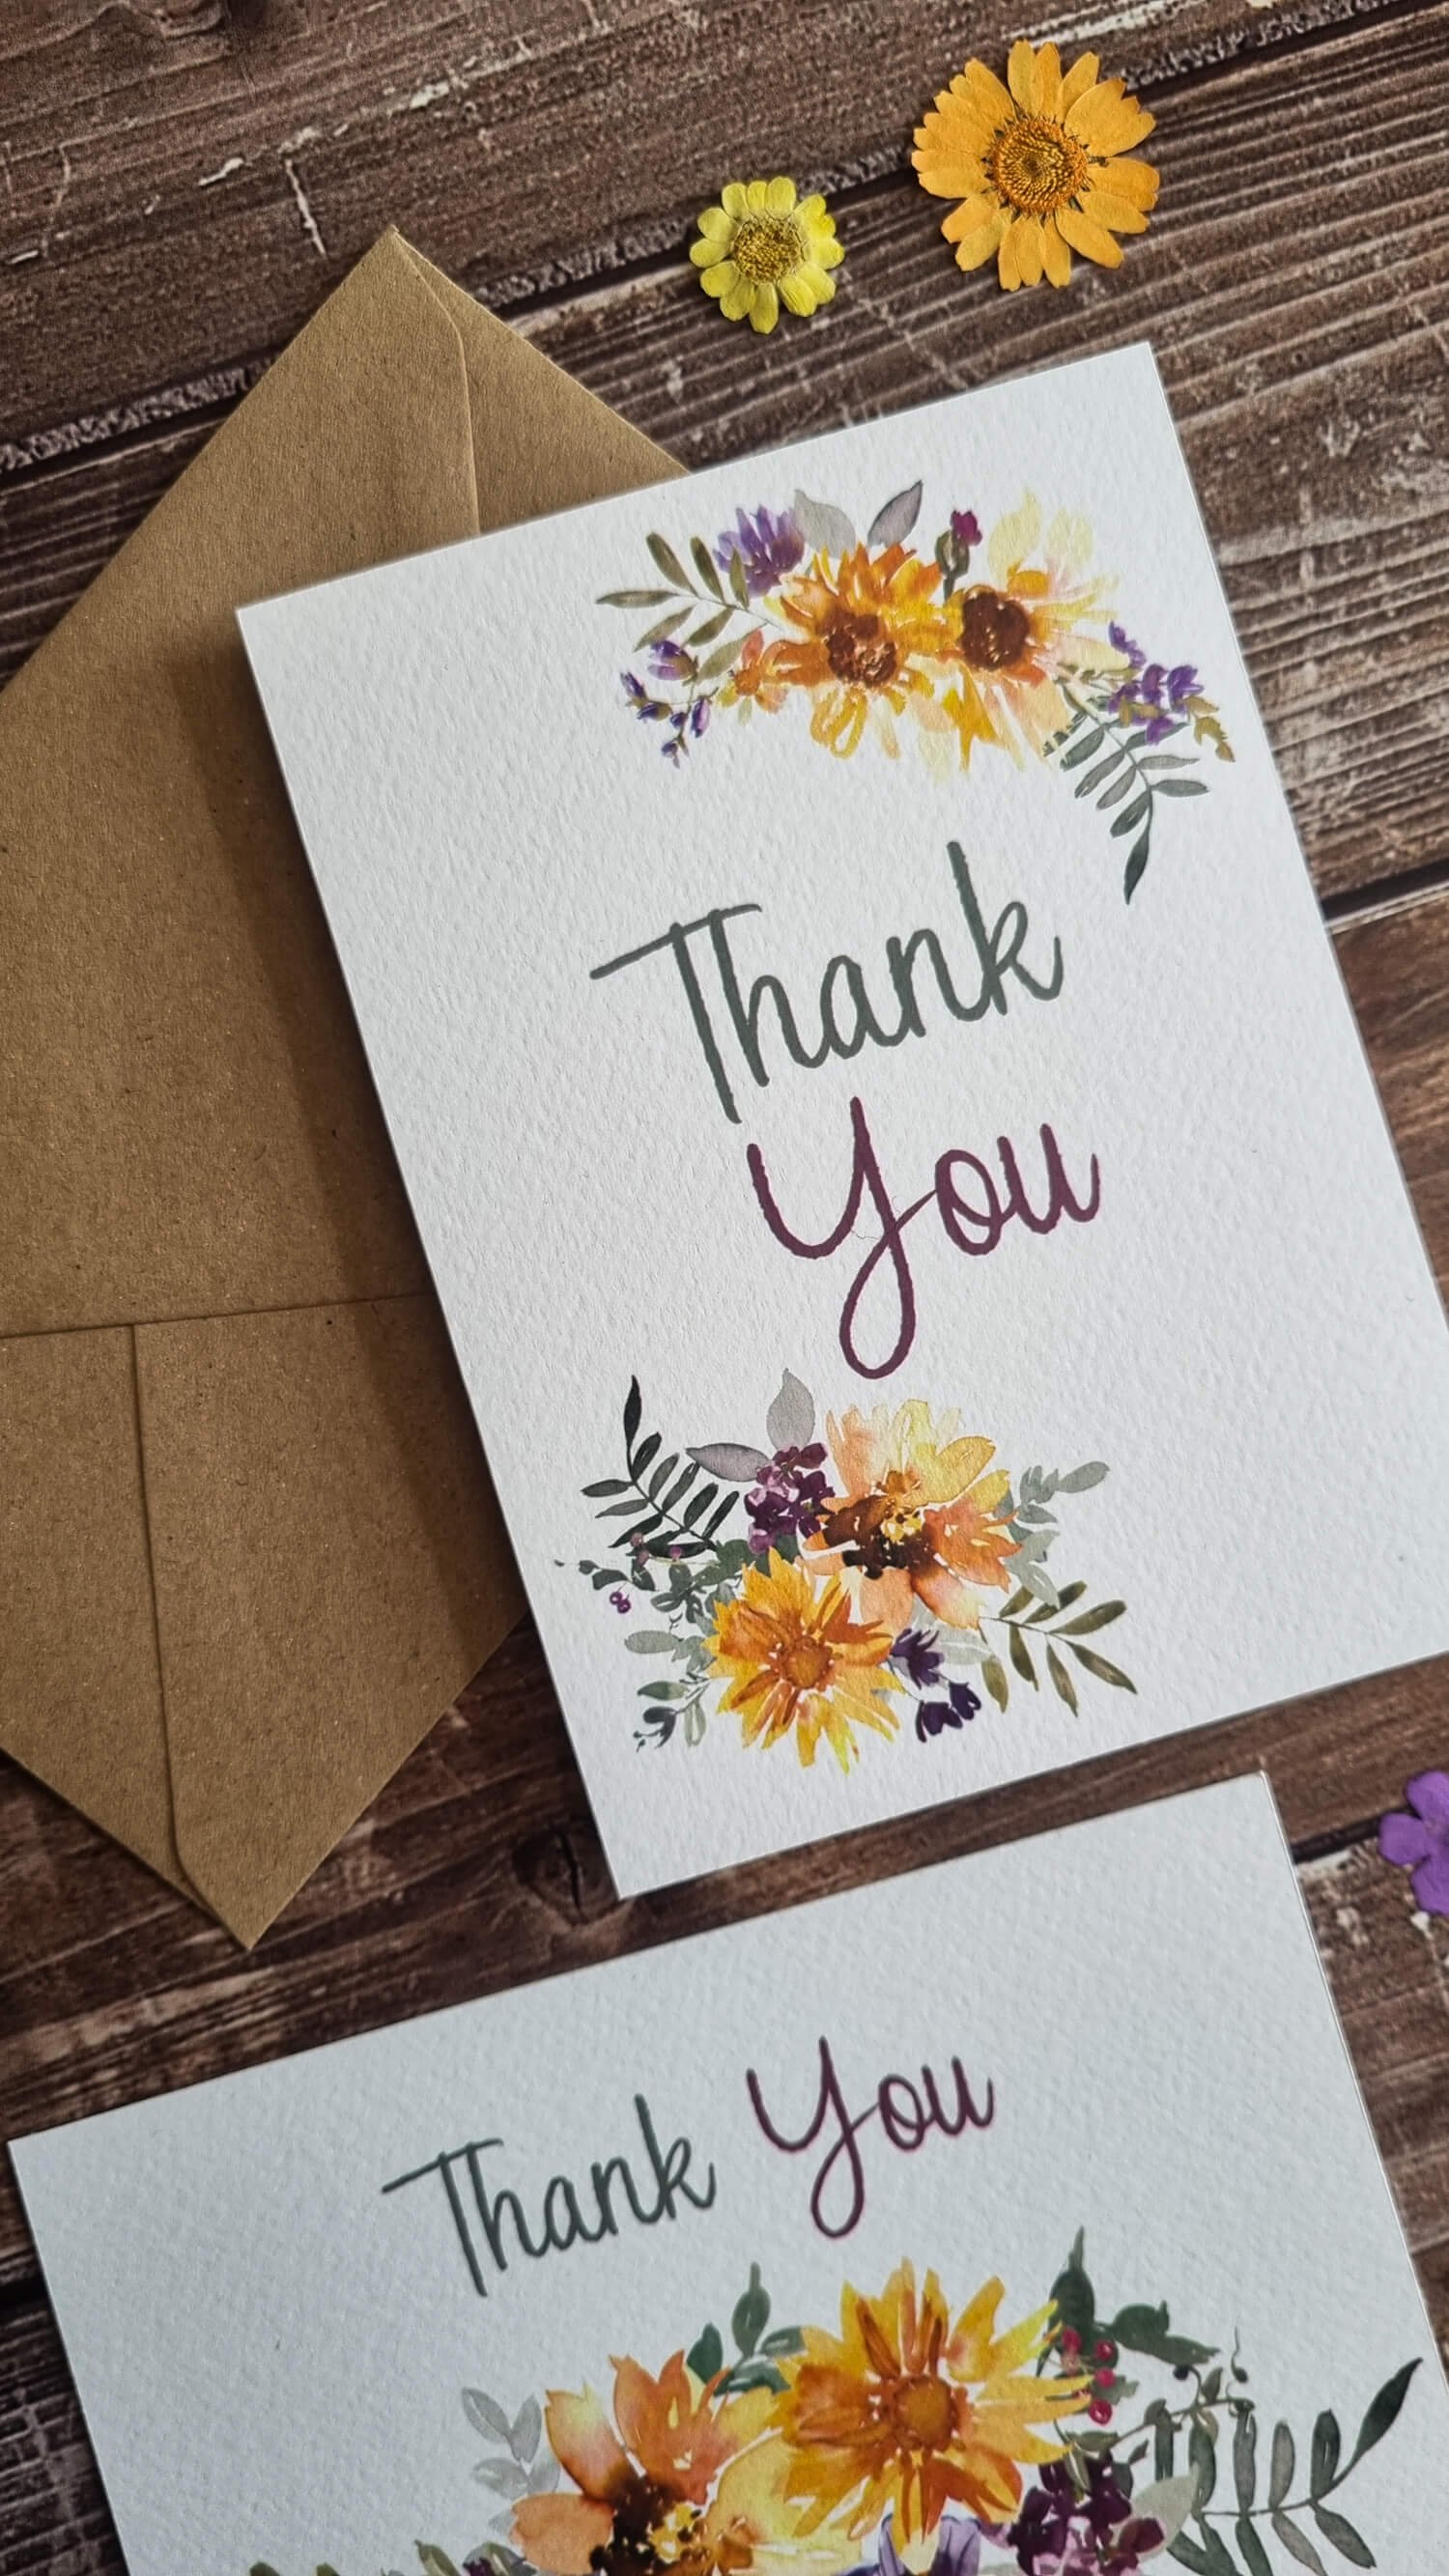 Sunflower Field thank you cards